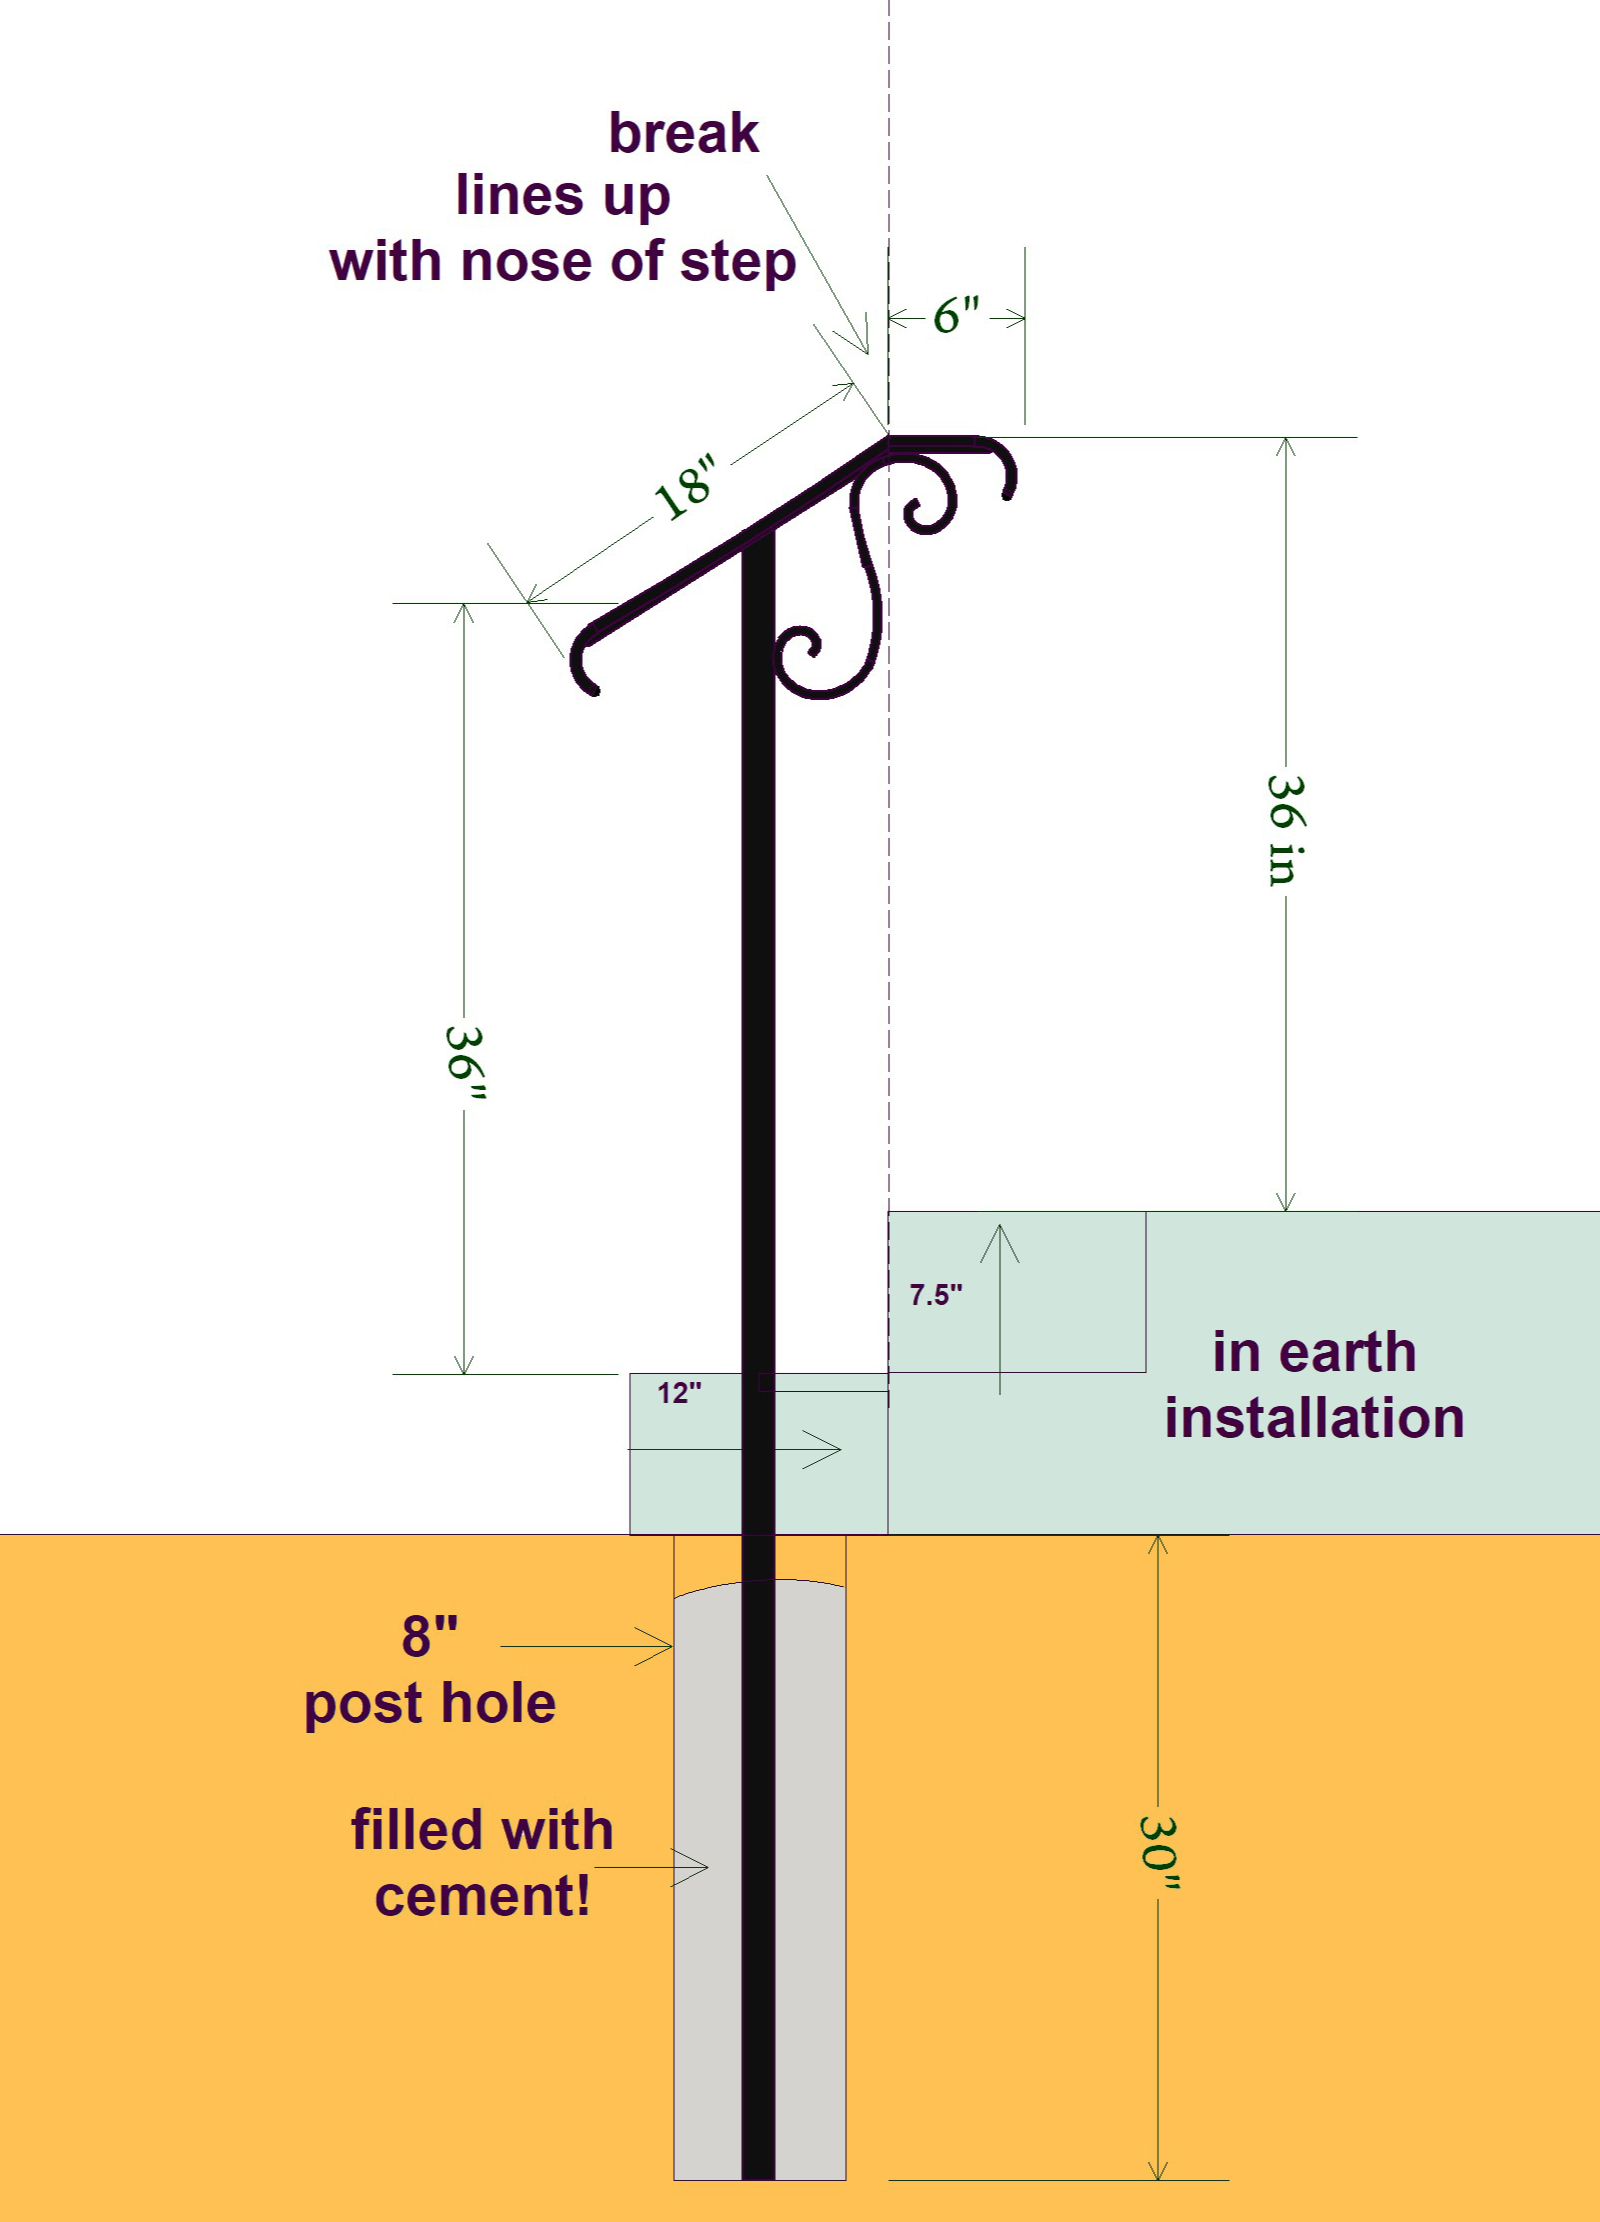 technical drawing of in earth installation of One Post Railling Shows the pole buried in an 8inch diameter hole with concrete sruddounding it in the hole.